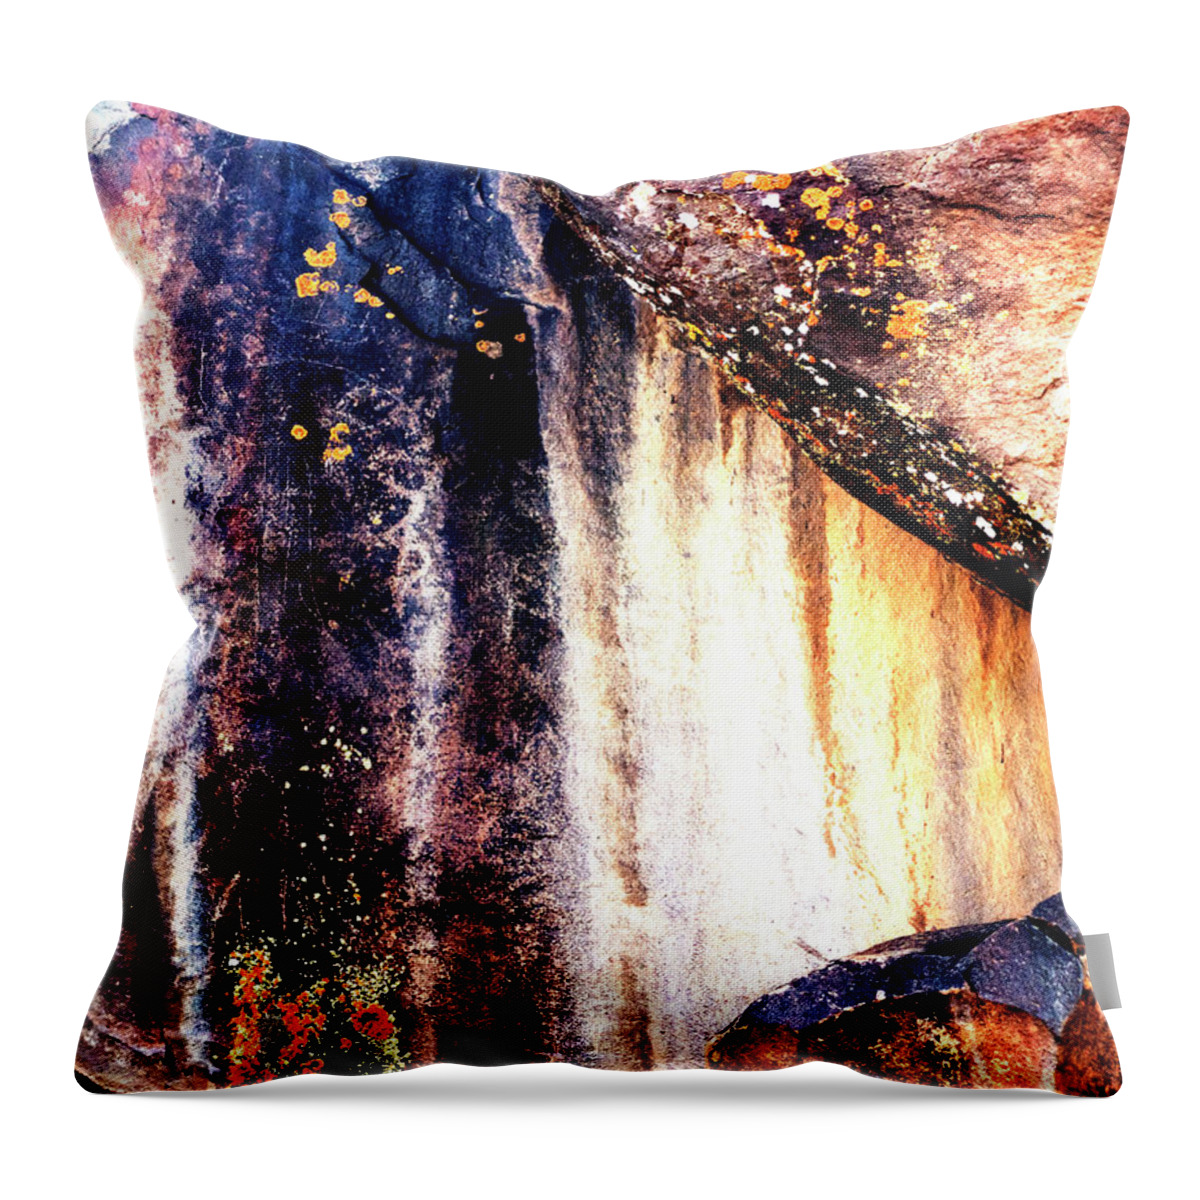 Rockface Throw Pillow featuring the photograph Renegade Canyon 1 by Jessica Levant